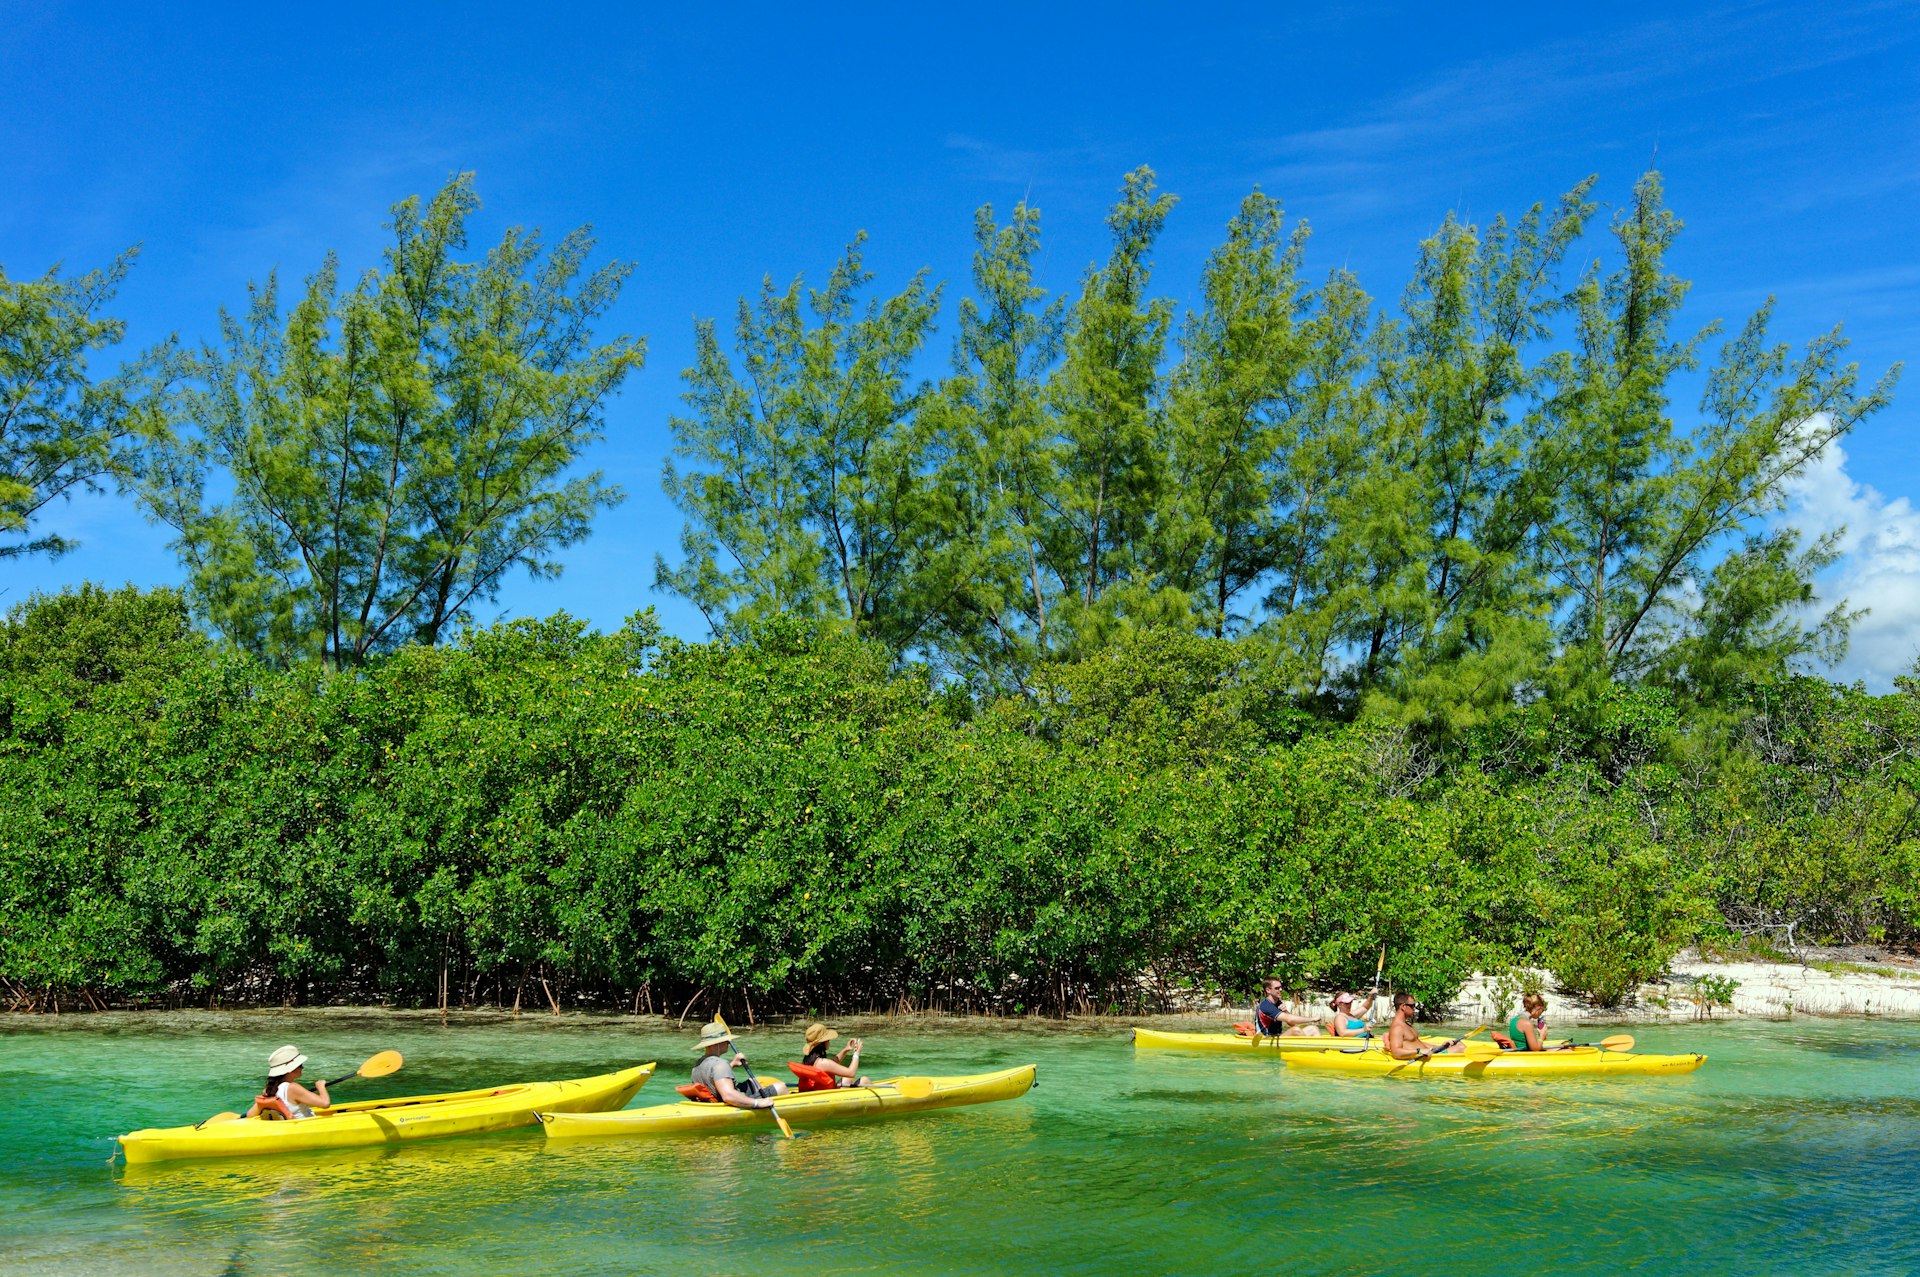 People kayaking in the blue ocean waters lined with mangroves at Lucayan National Park, Bahamas